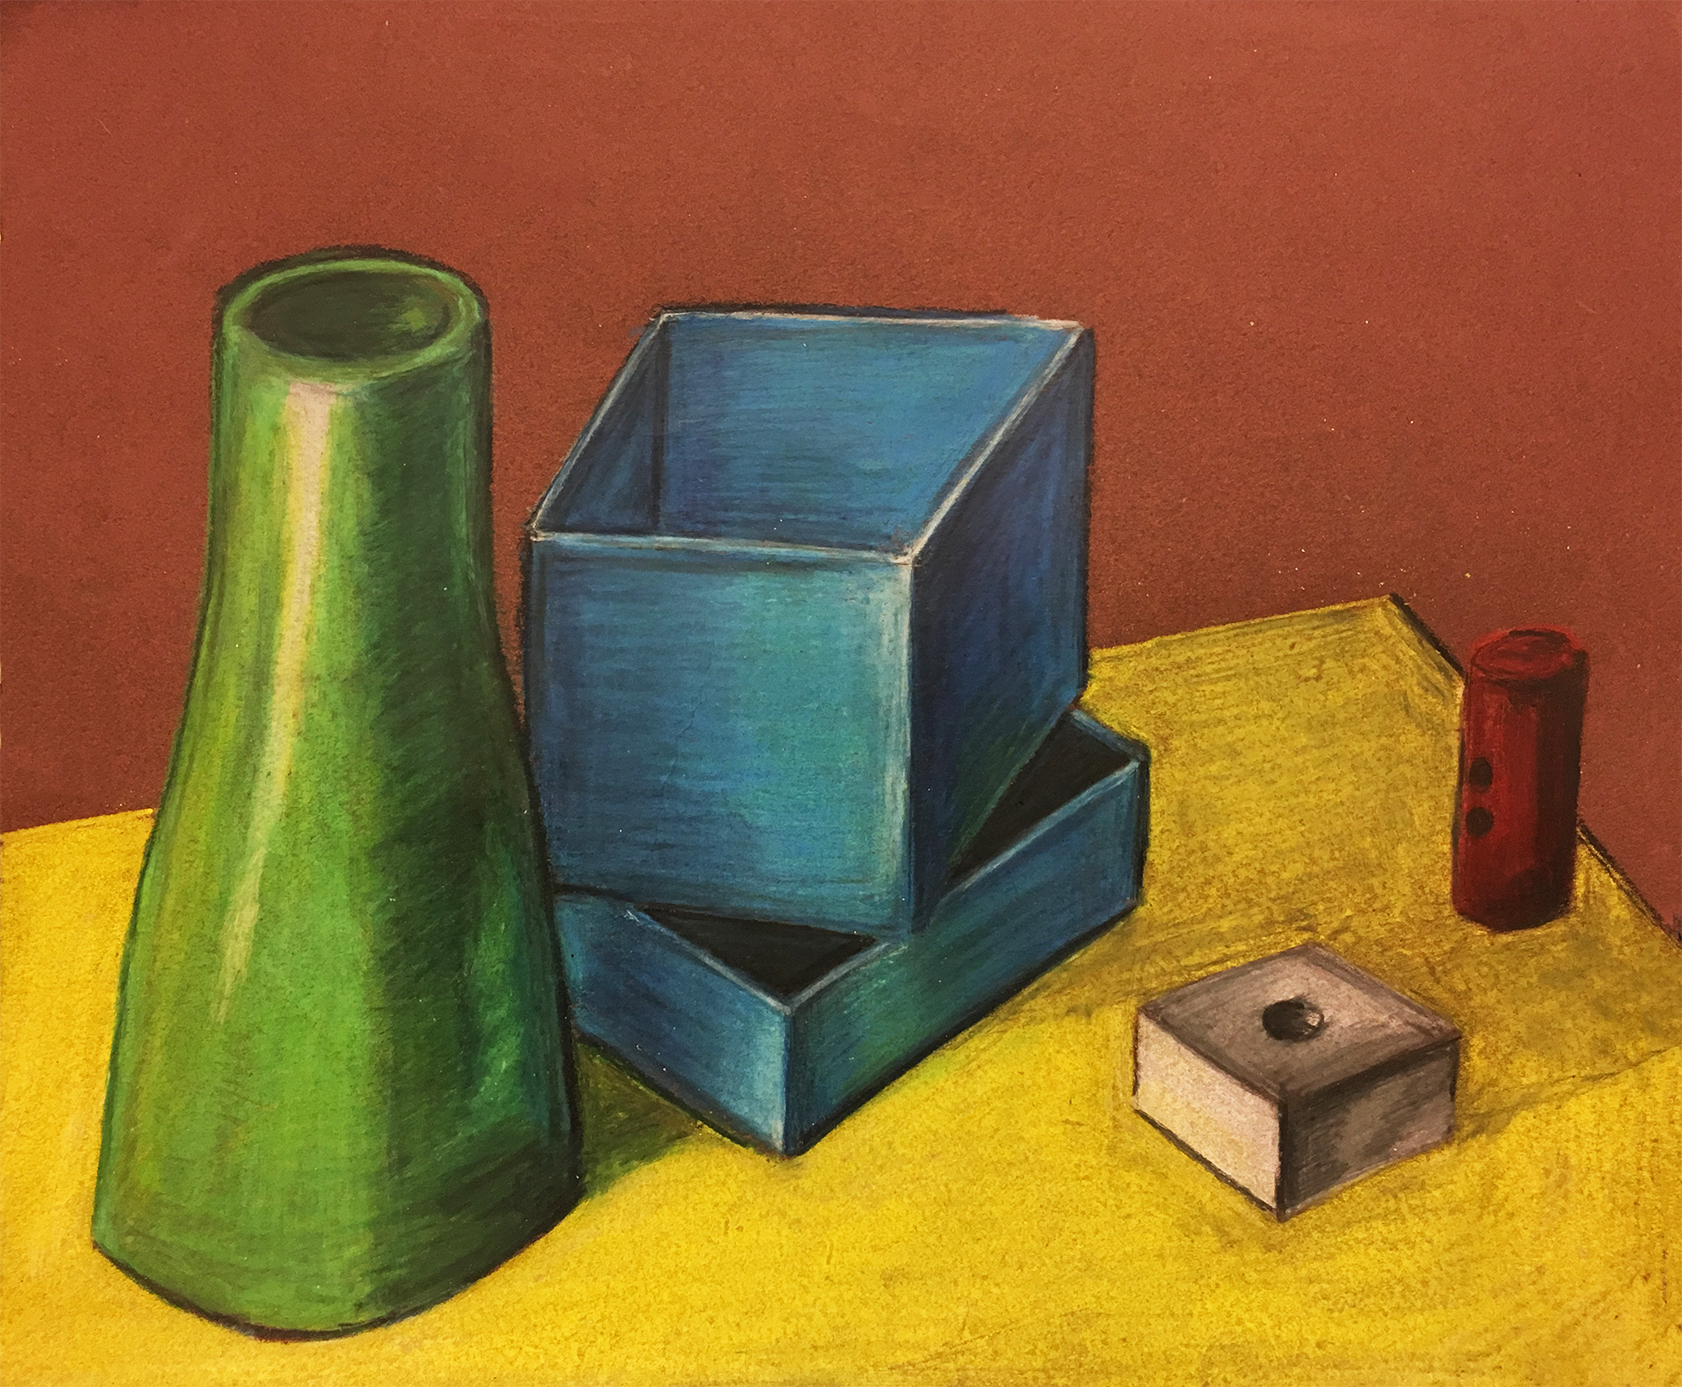 Objects in color pencil exercise